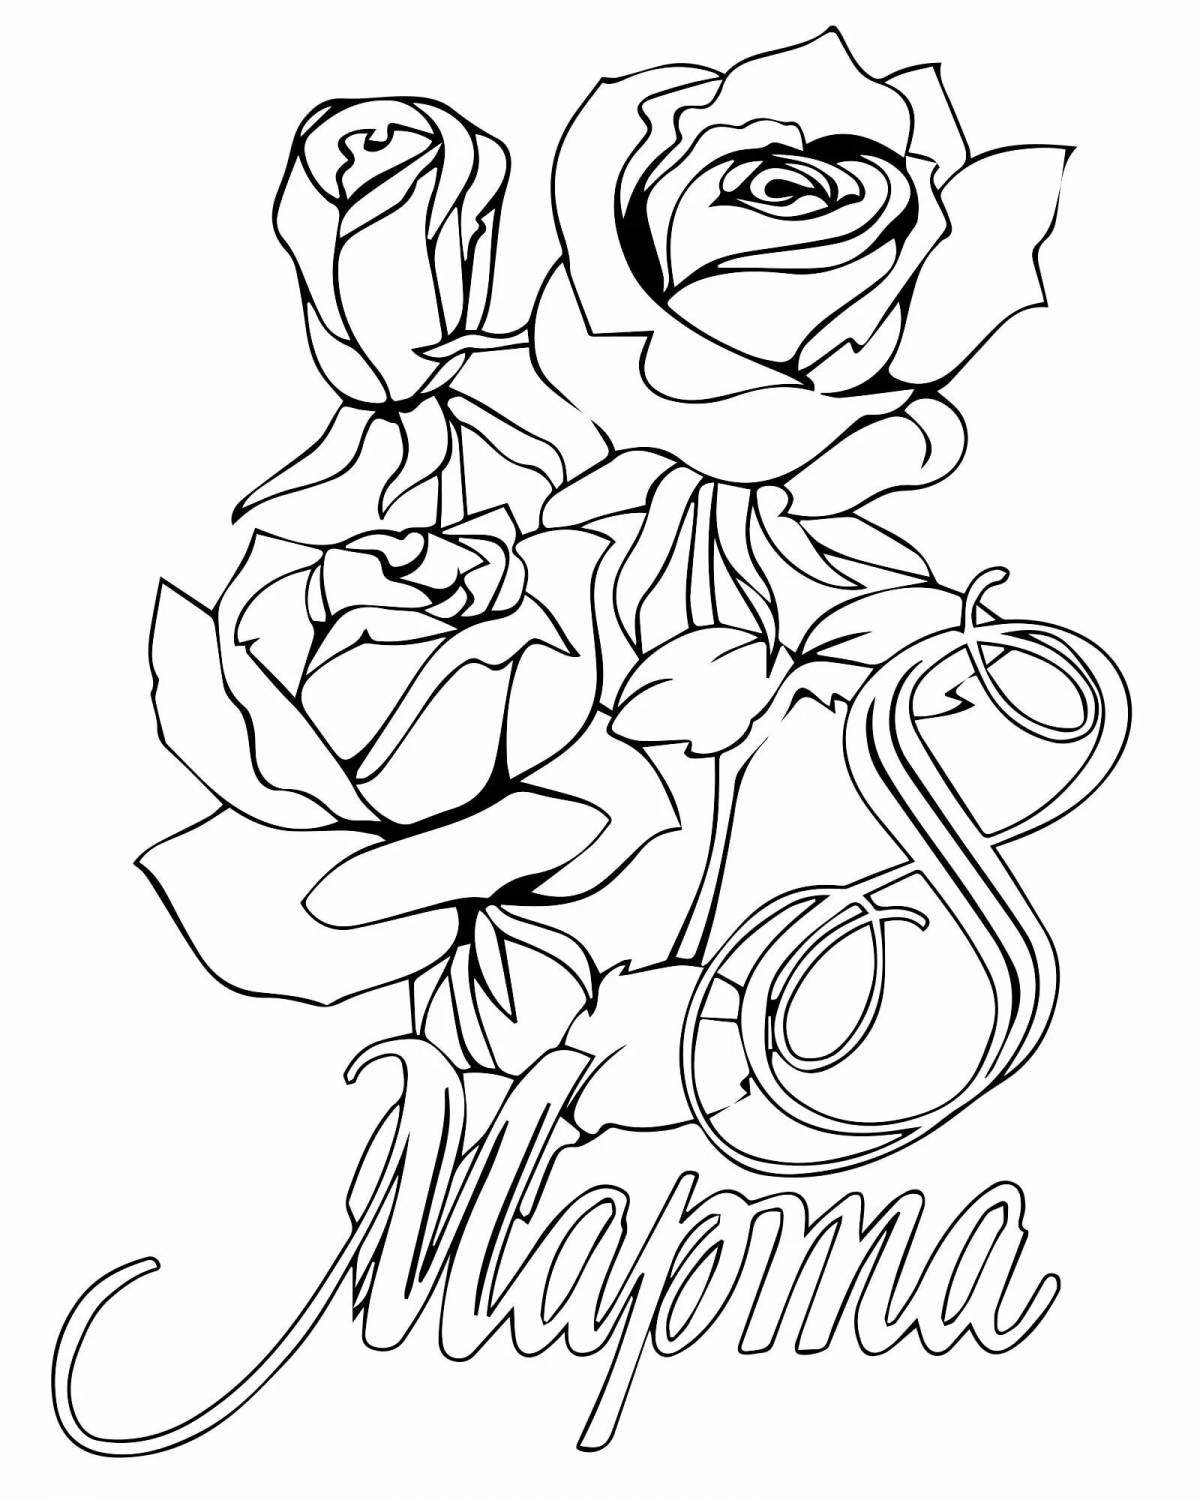 Gorgeous coloring of mom for March 8